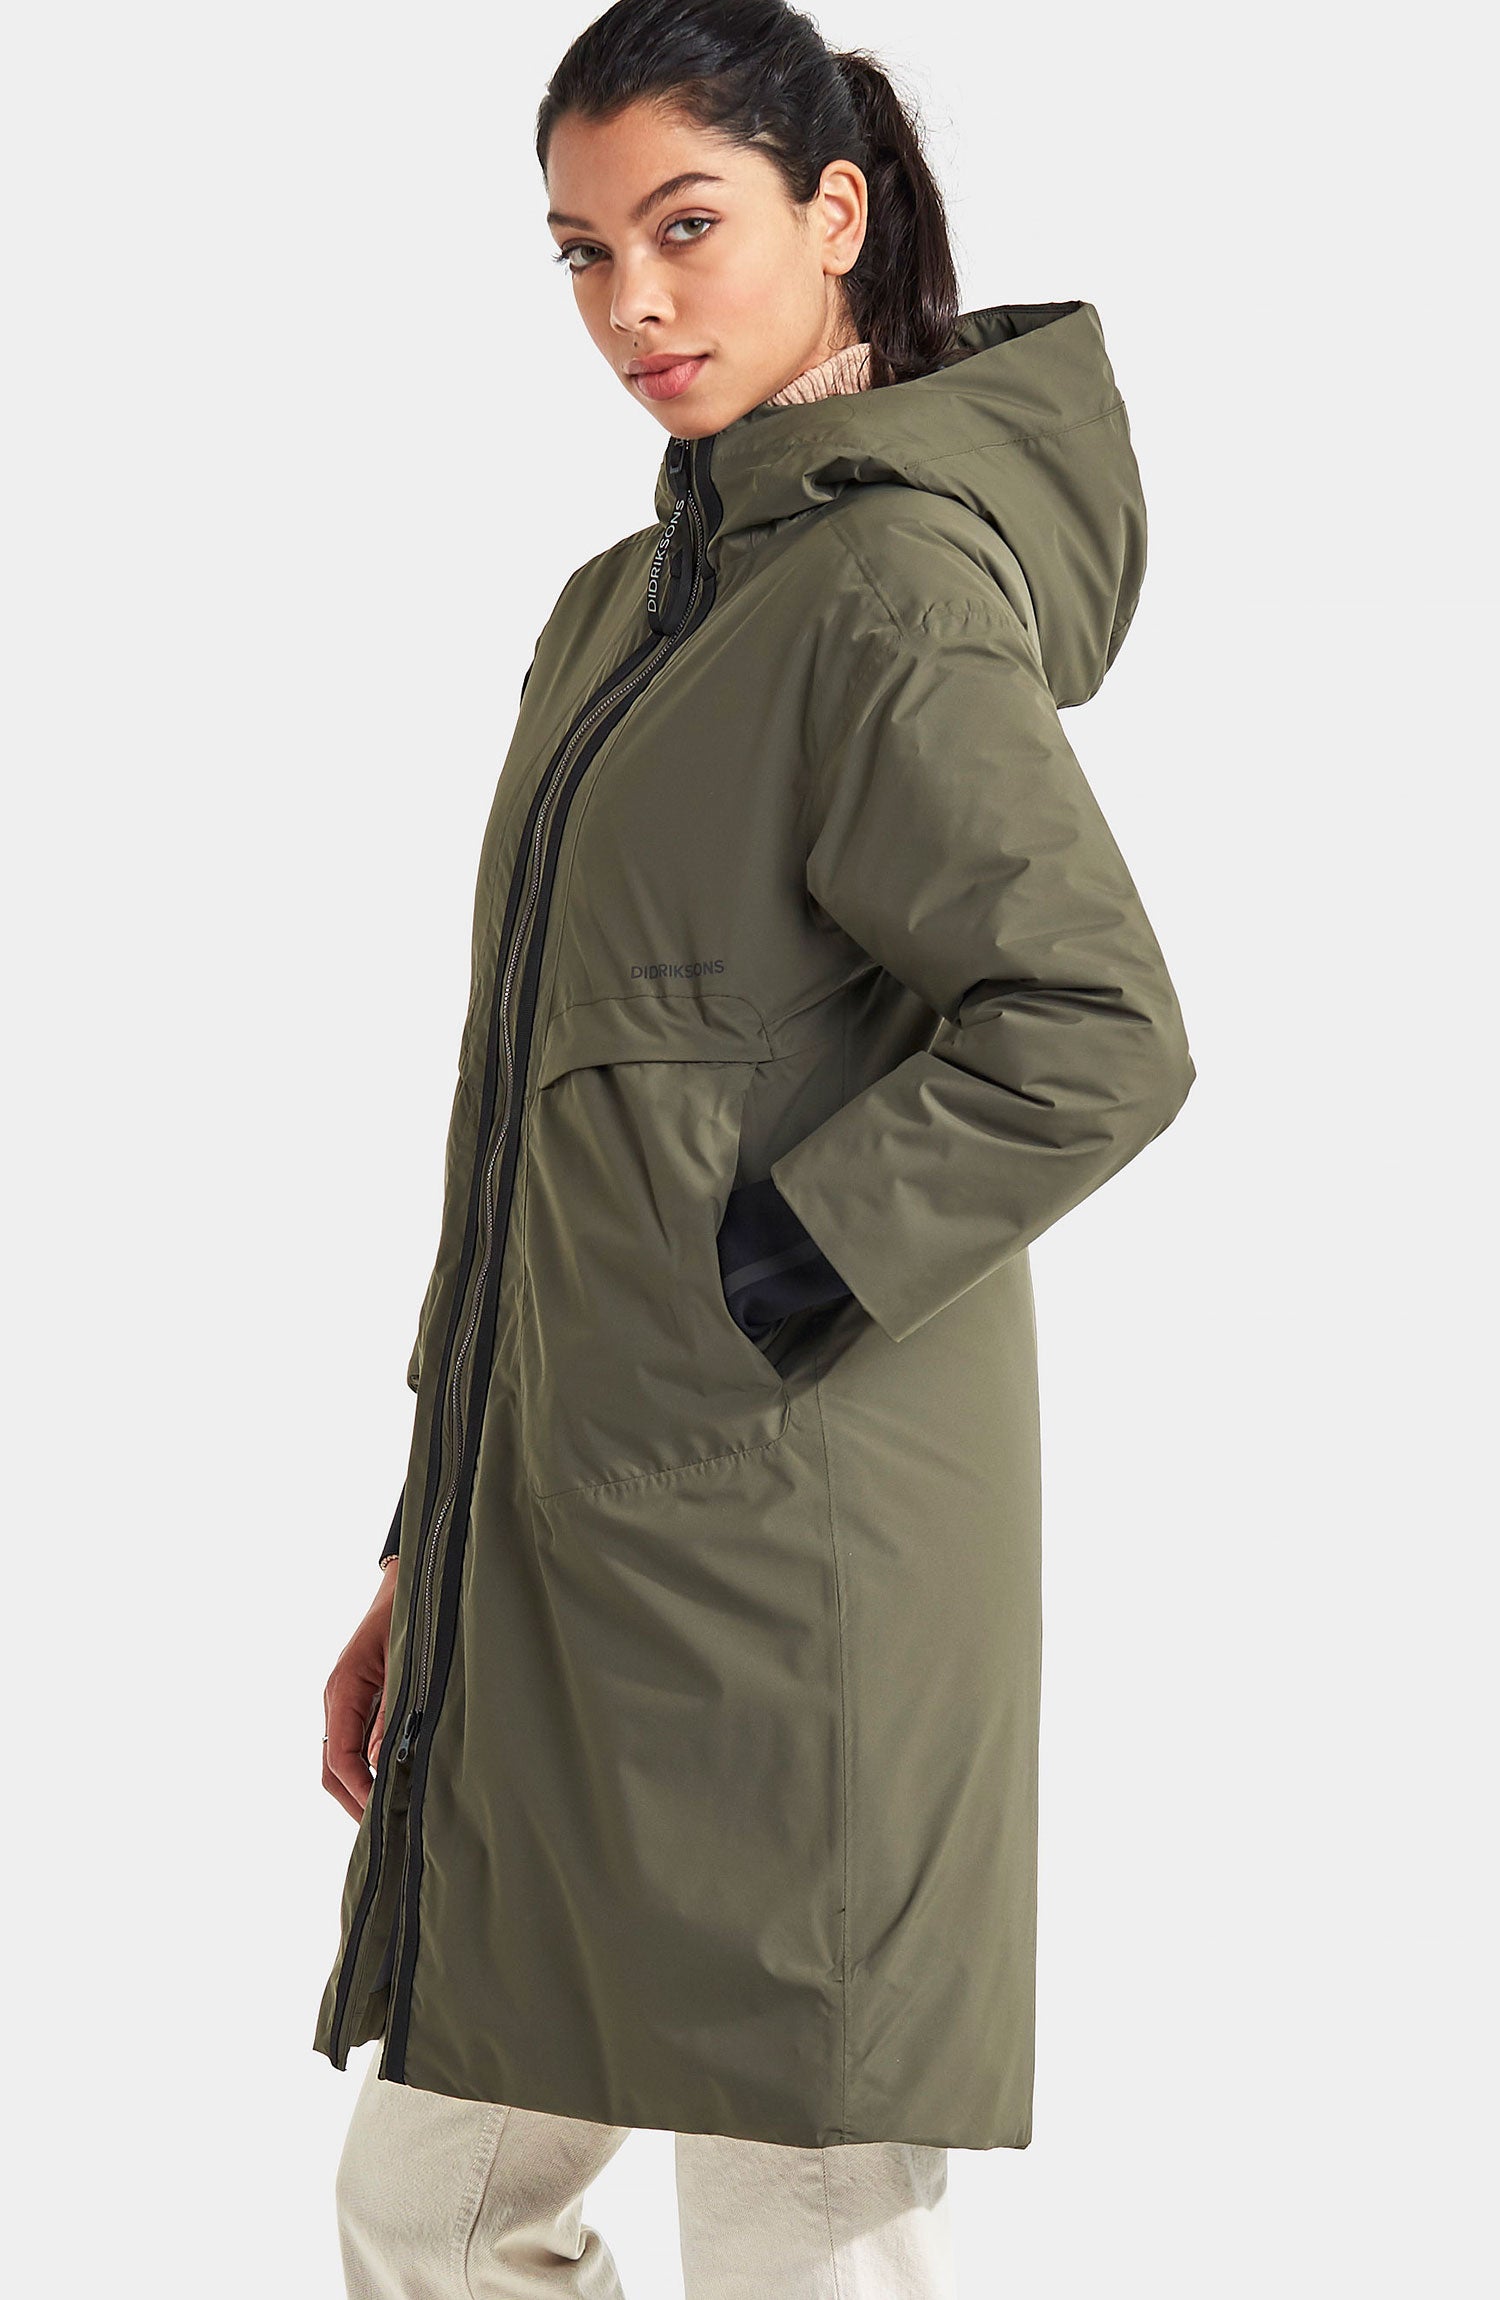 Didriksons Aino 2 Waterproof Parka – Hollands Country Clothing